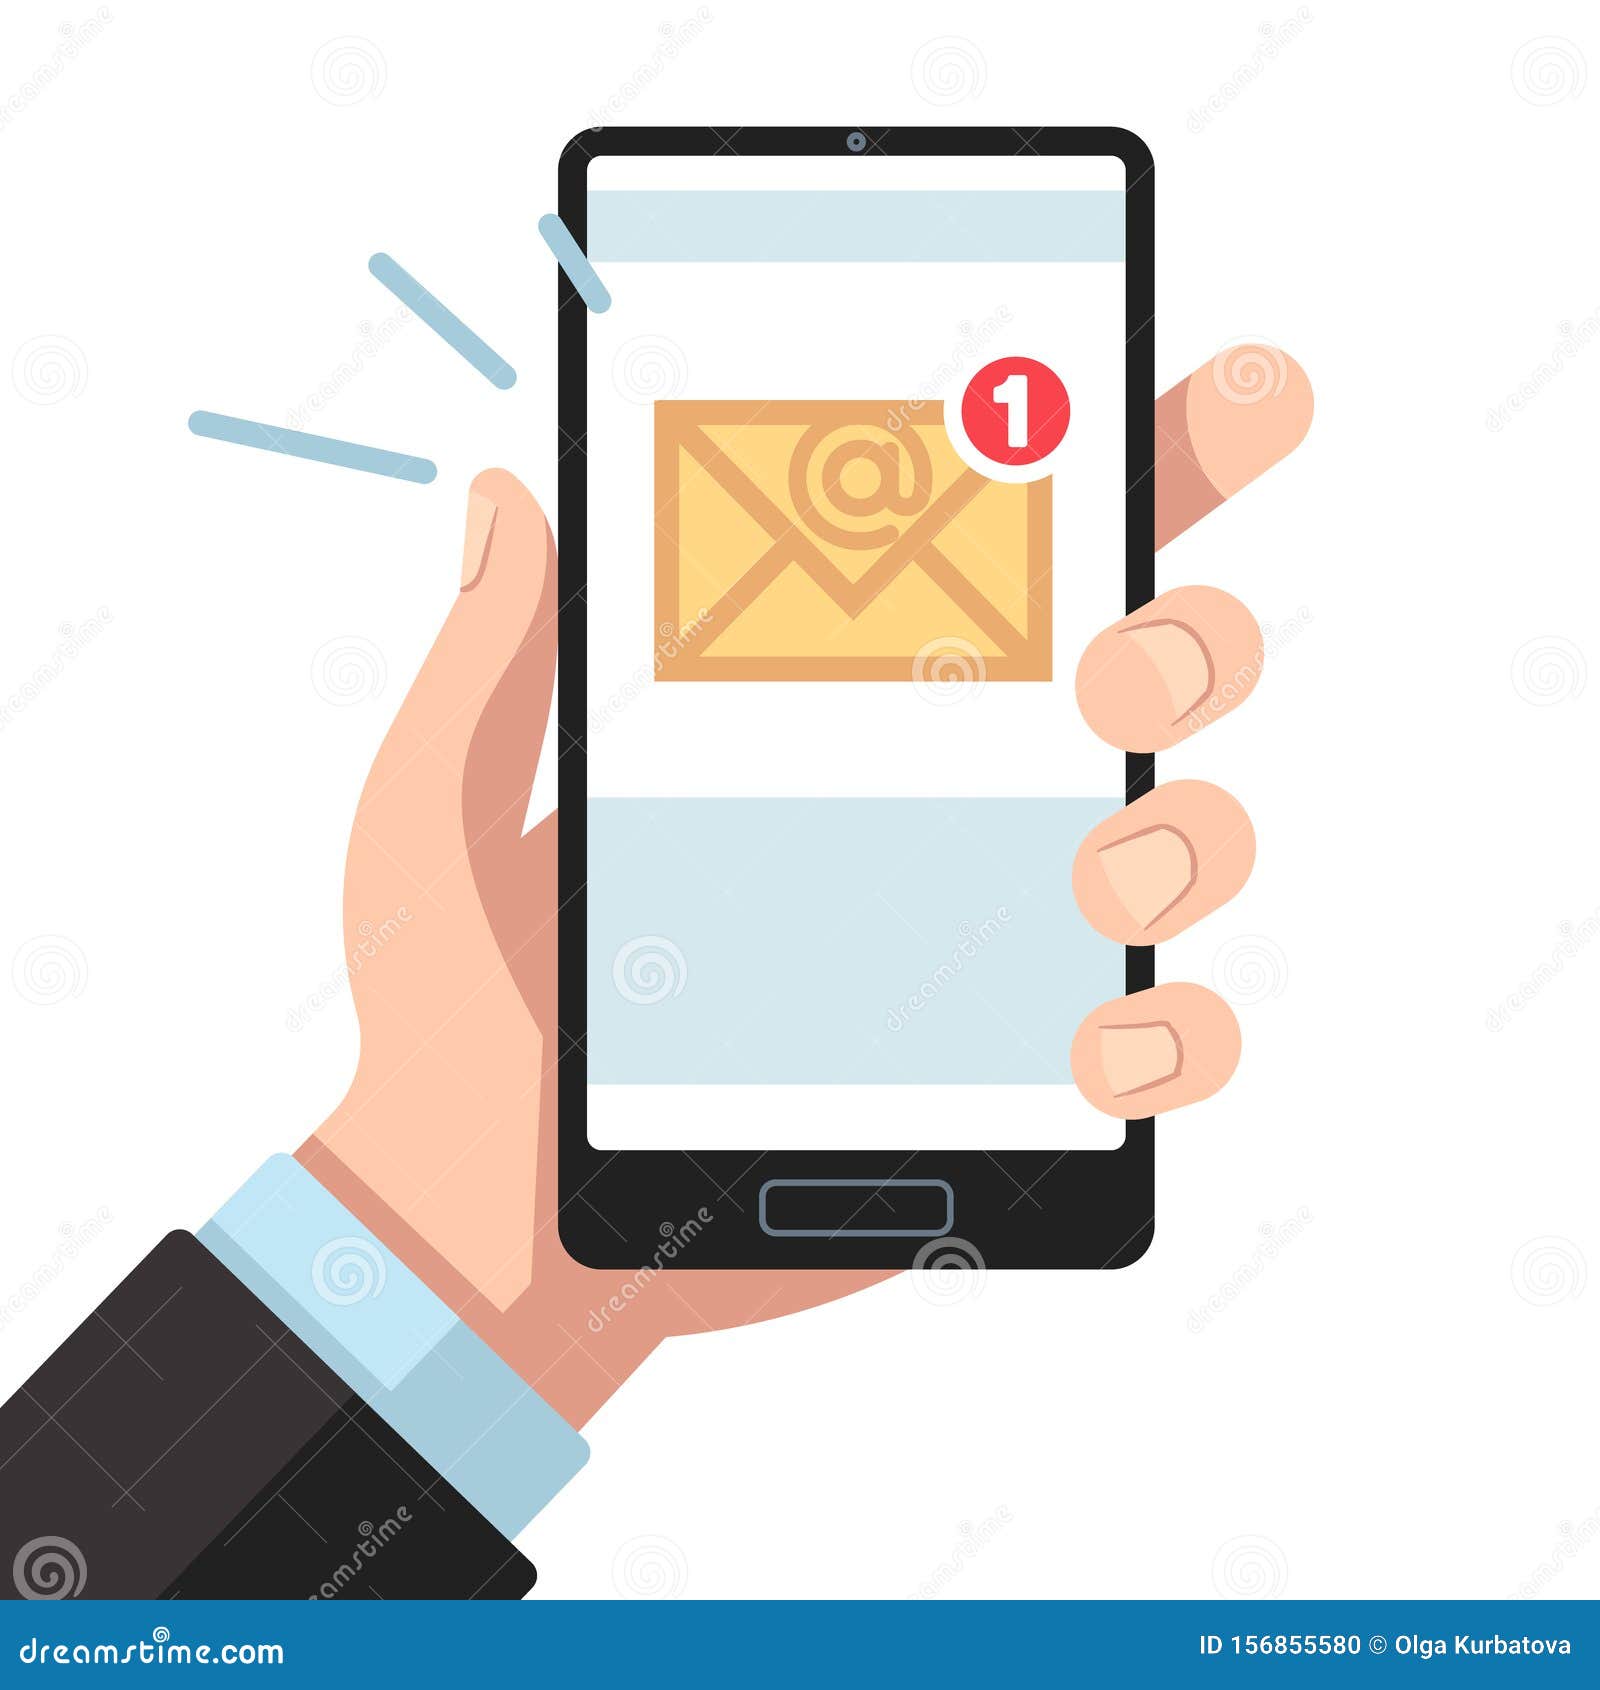 email notification on smartphone in hand. inbox unread mail, new emails message. sending letters receive mobile mailings